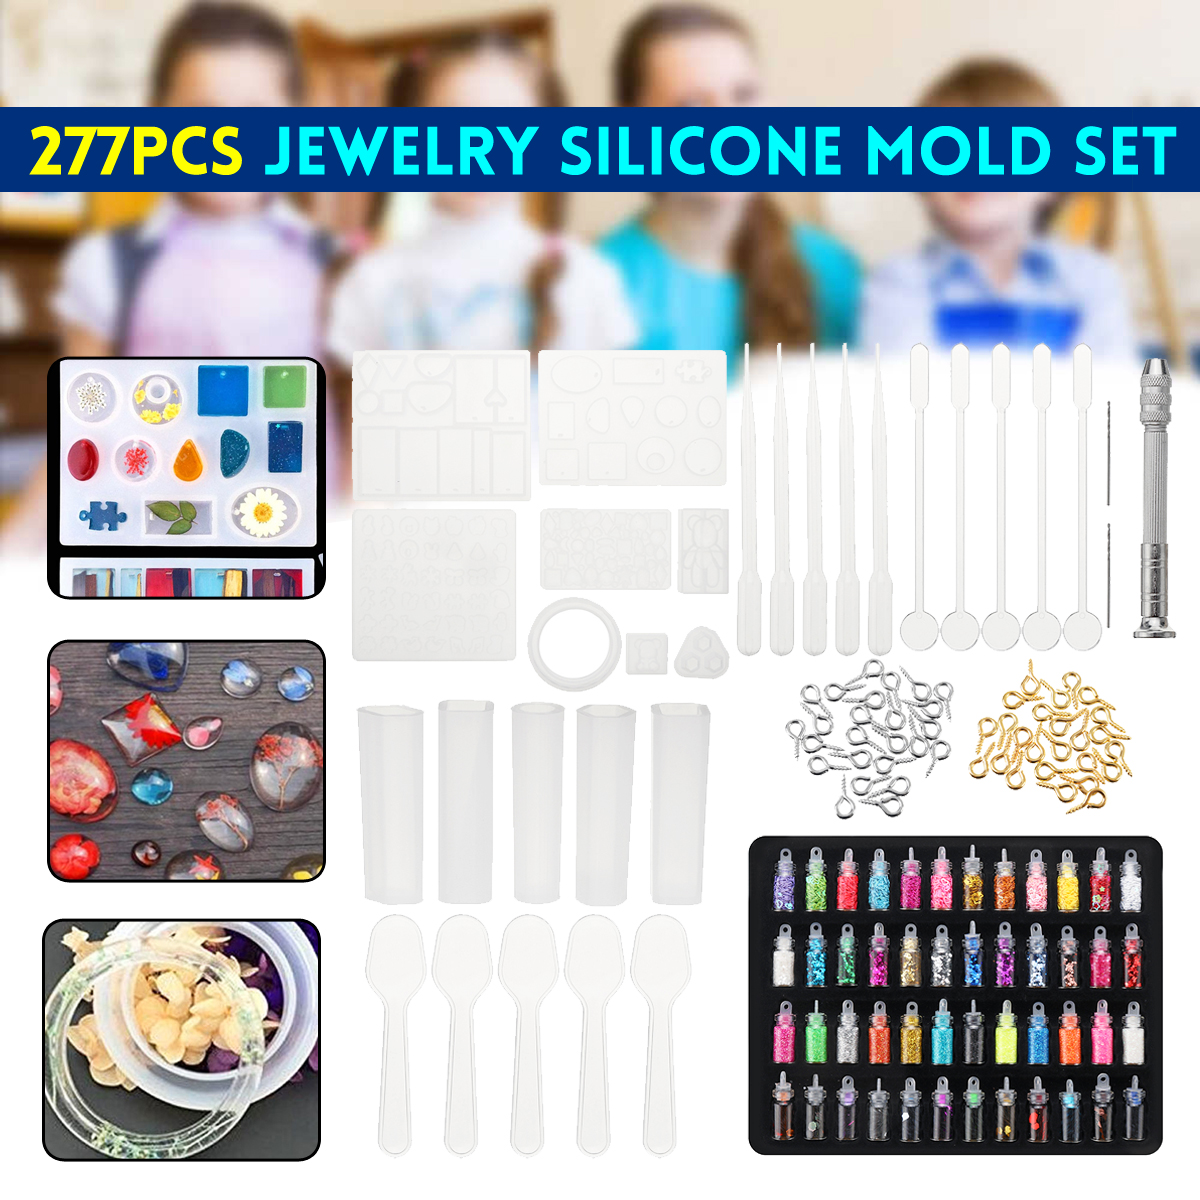 277Pcs-Jewelry-Silicone-Mold-Set-DIY-Craft-Resin-Casting-Making-Jewelry-Pendant-1768742-1